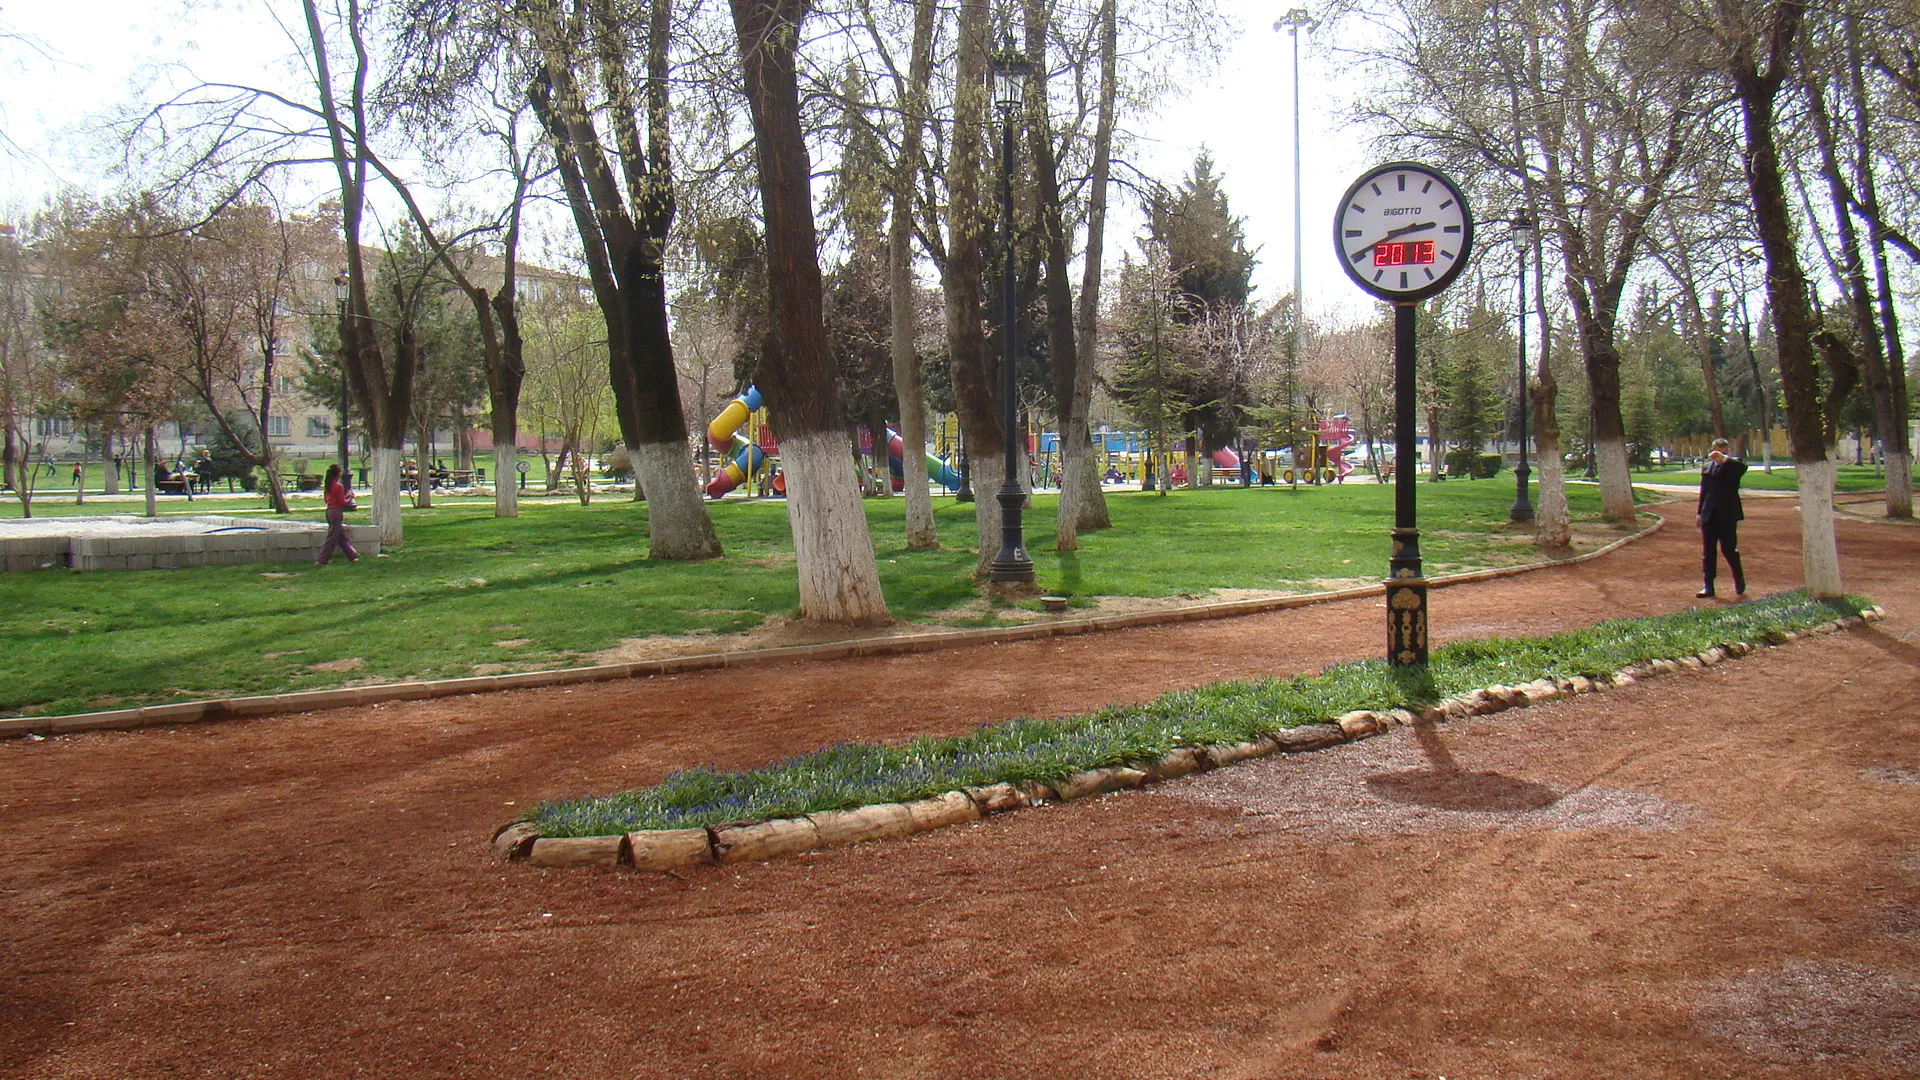 Poplar Park in Turkey, Central Asia | Parks - Rated 3.6